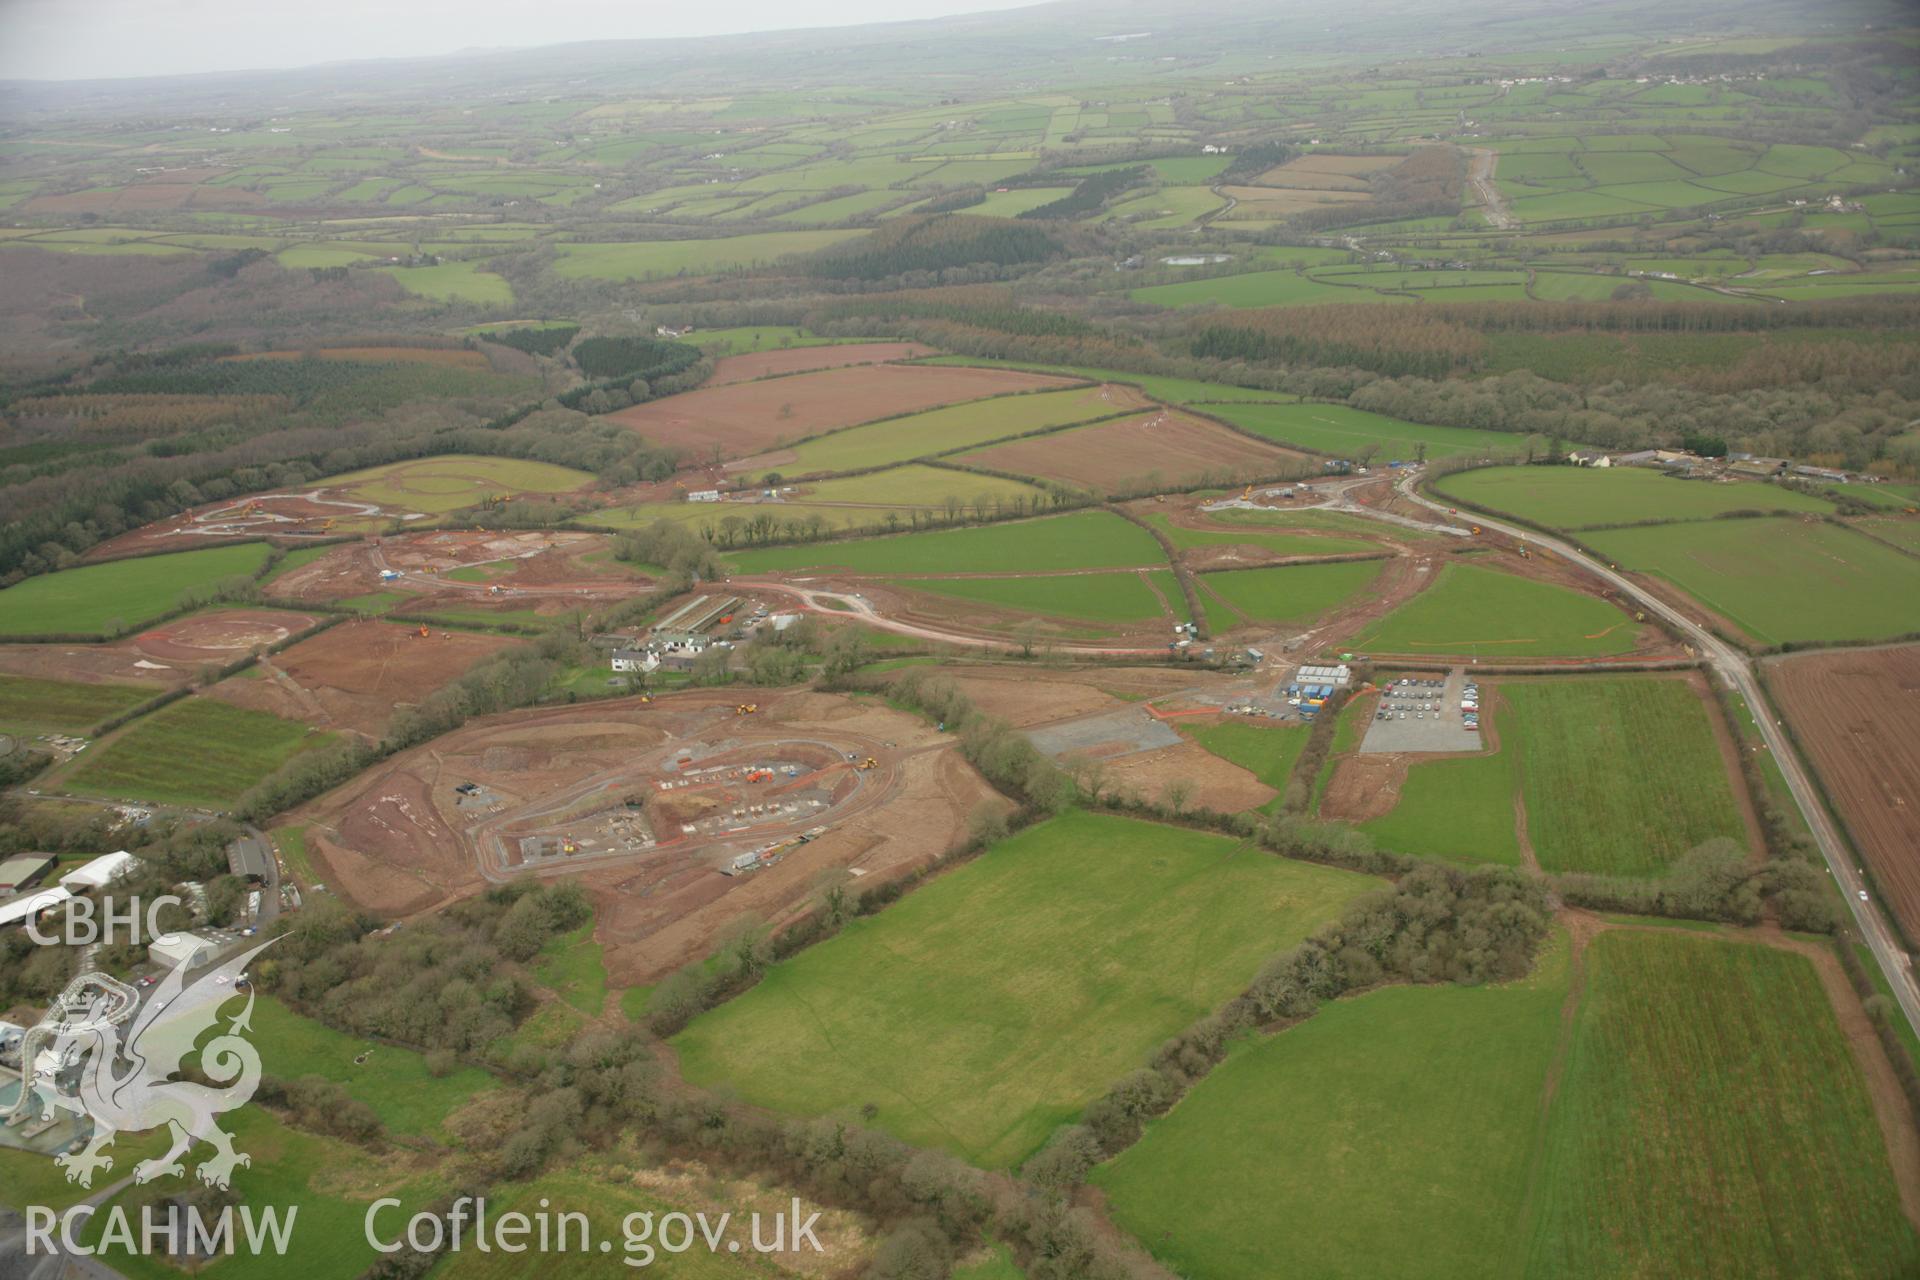 RCAHMW colour oblique aerial photograph of Bluestone Holiday Village, Narberth. Taken on 16 March 2007 by Toby Driver